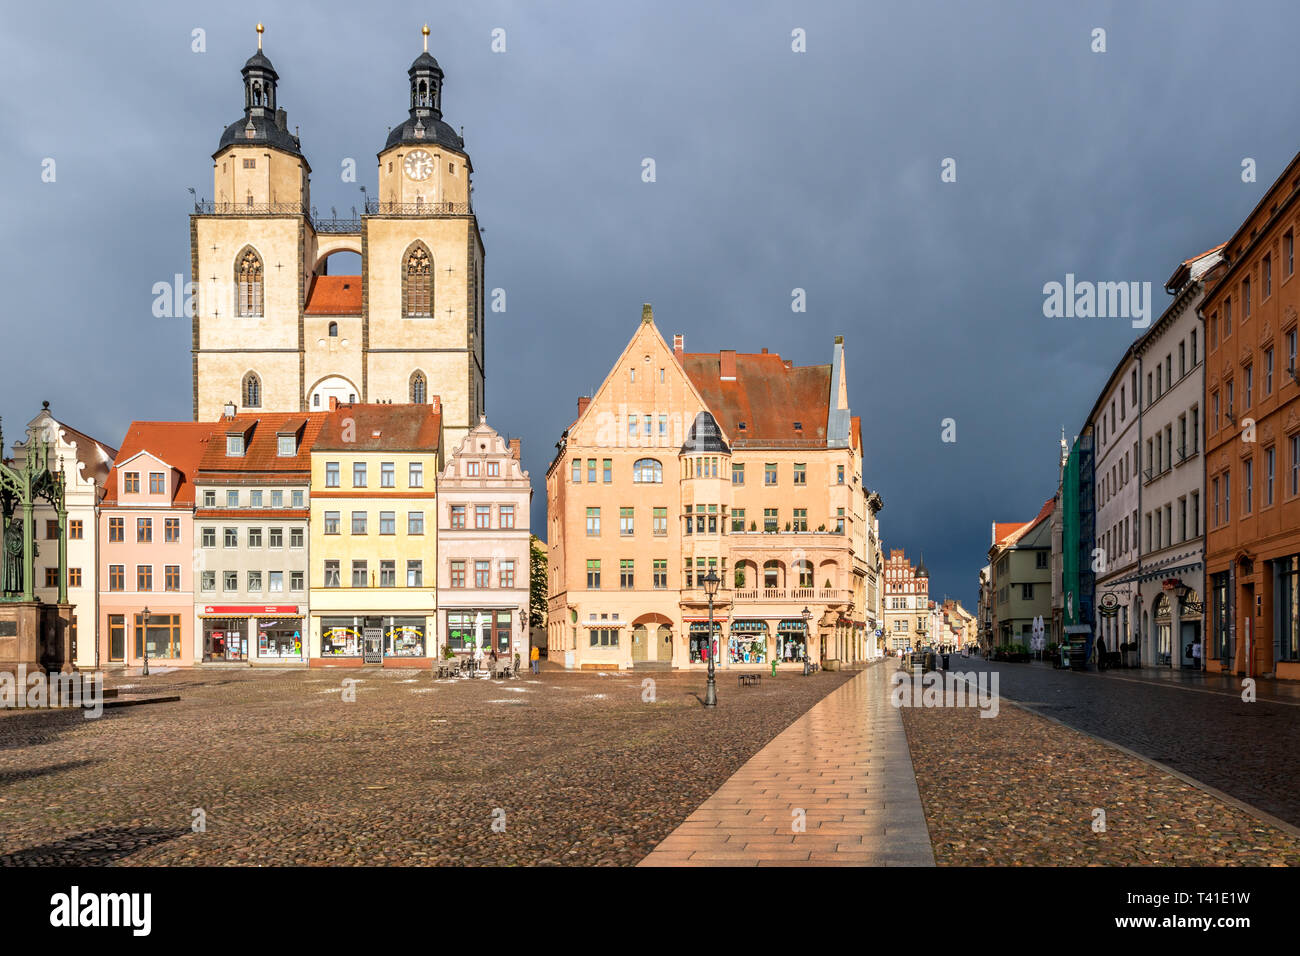 WITTENBERG, GERMANY - APRIL 26, 2018: View on the market square with town hall and Stadtkirche Wittenberg in Lutherstadt Wittenberg city, Saxeny-Anhal Stock Photo